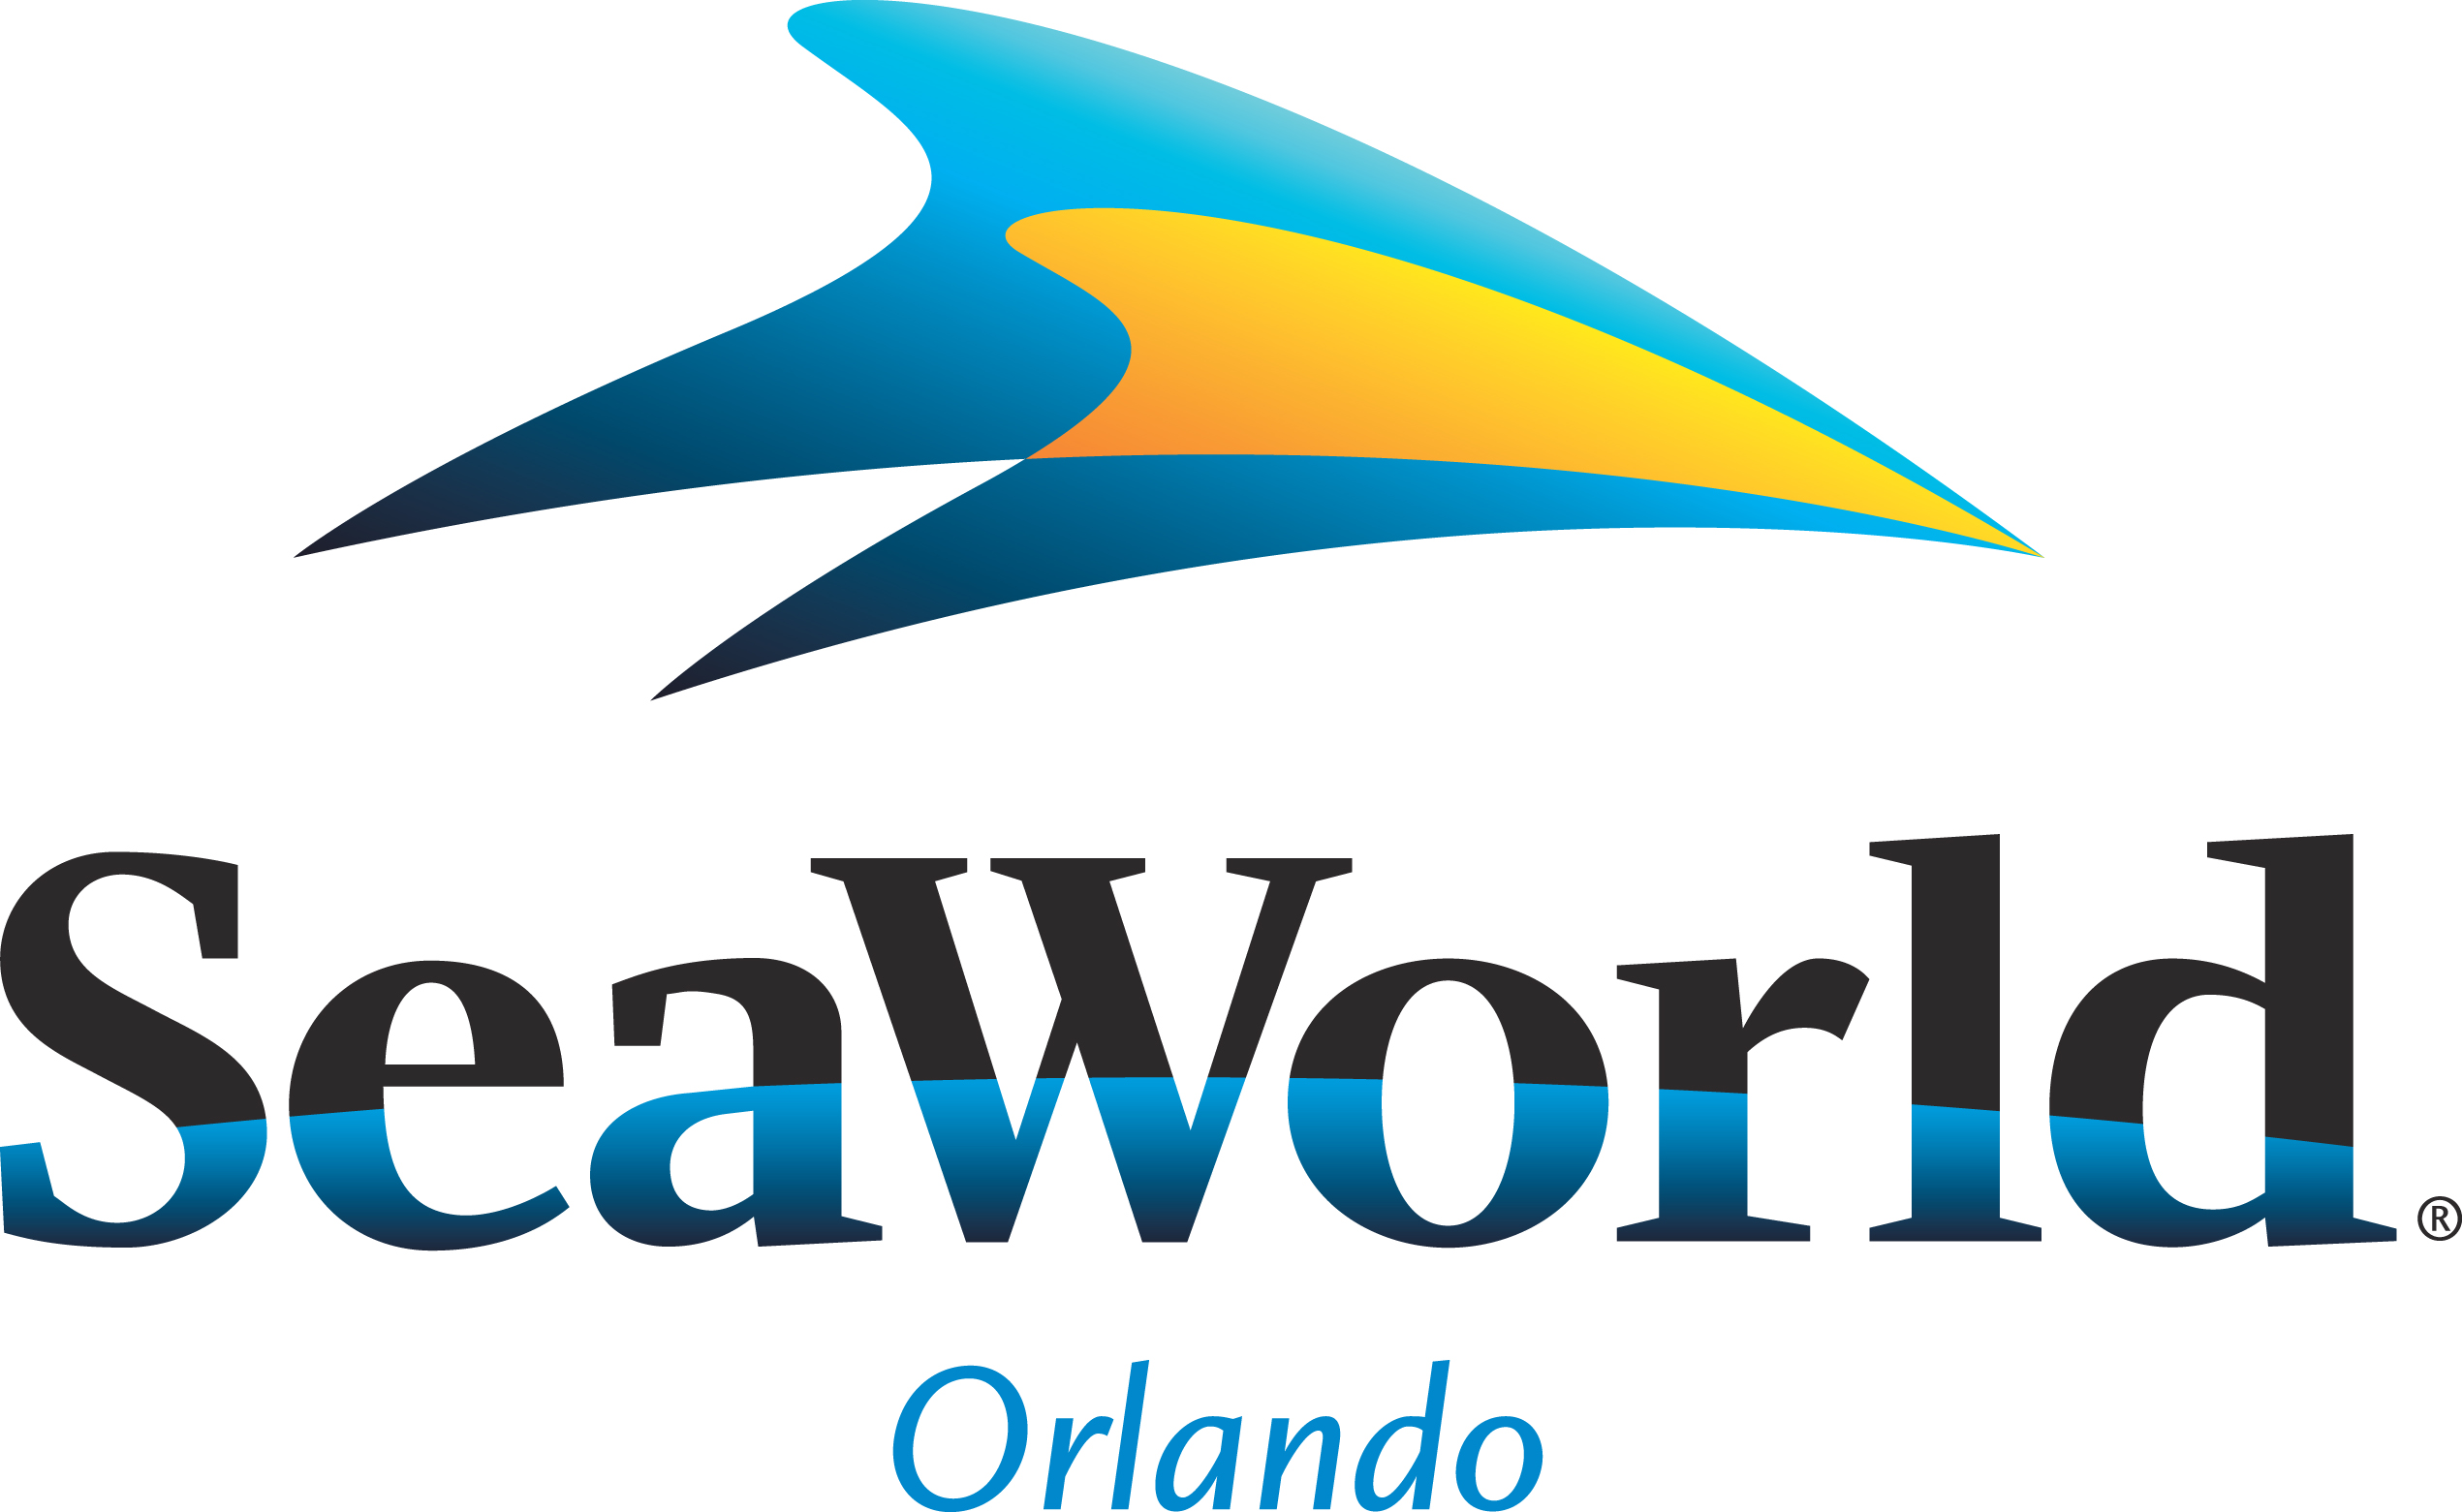 Get info on Seaworld Orlando attractions and entertainment.